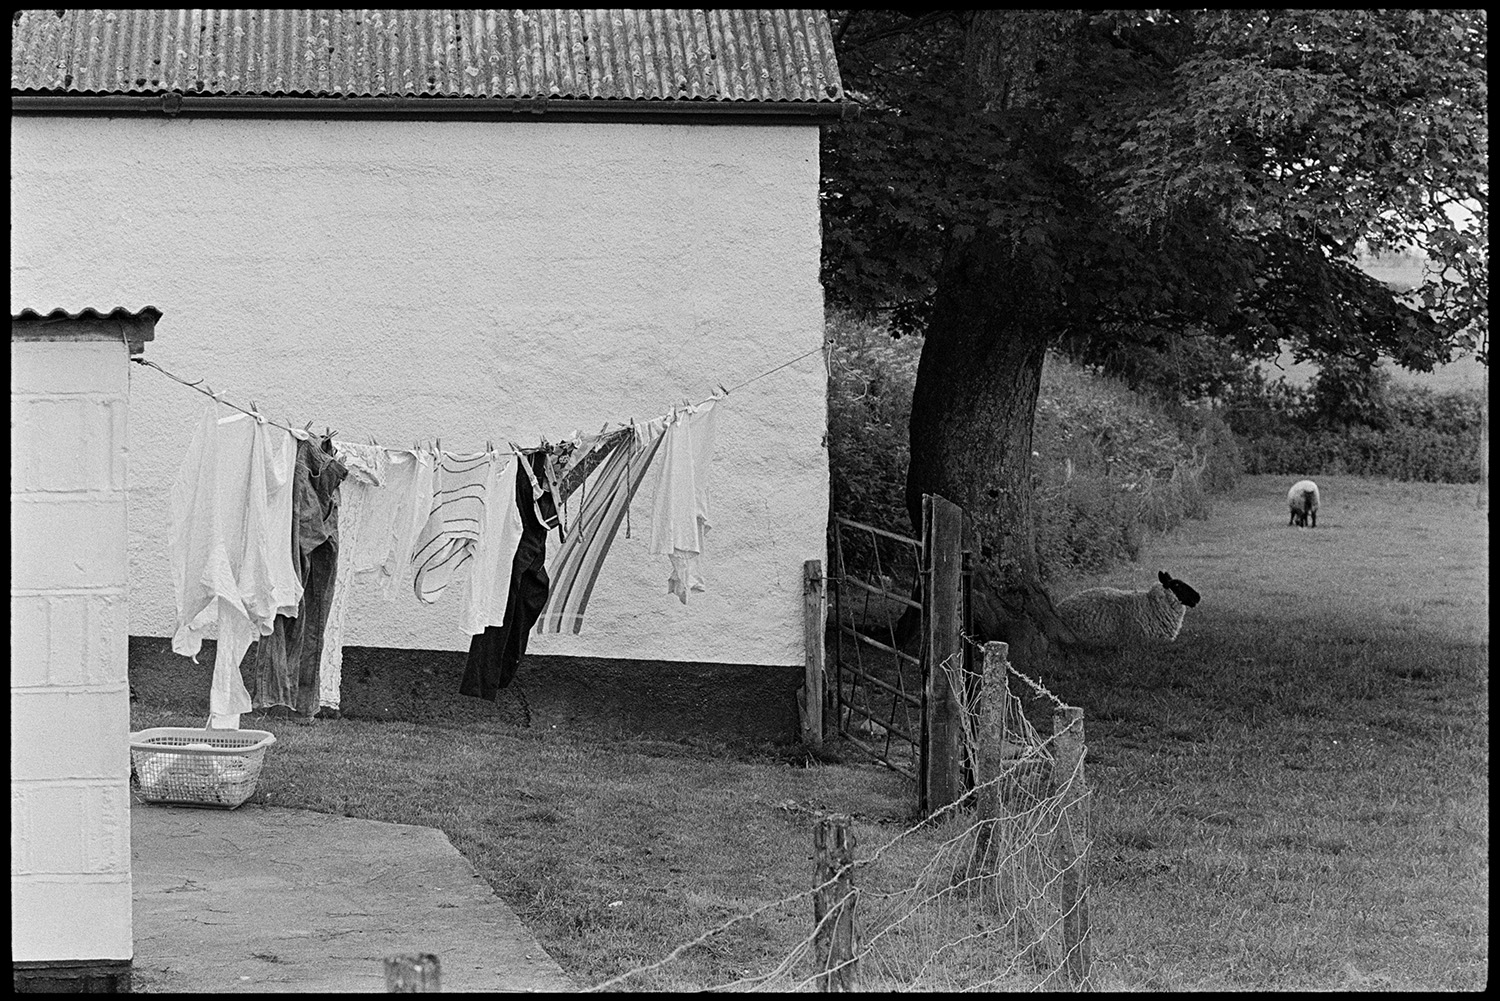 Washing on line. 
[Washing hung out to dry on a washing line strung between two farm buildings with corrugated iron roofs at Parsonage, Iddesleigh. Sheep can be seen in the field next to the buildings.]